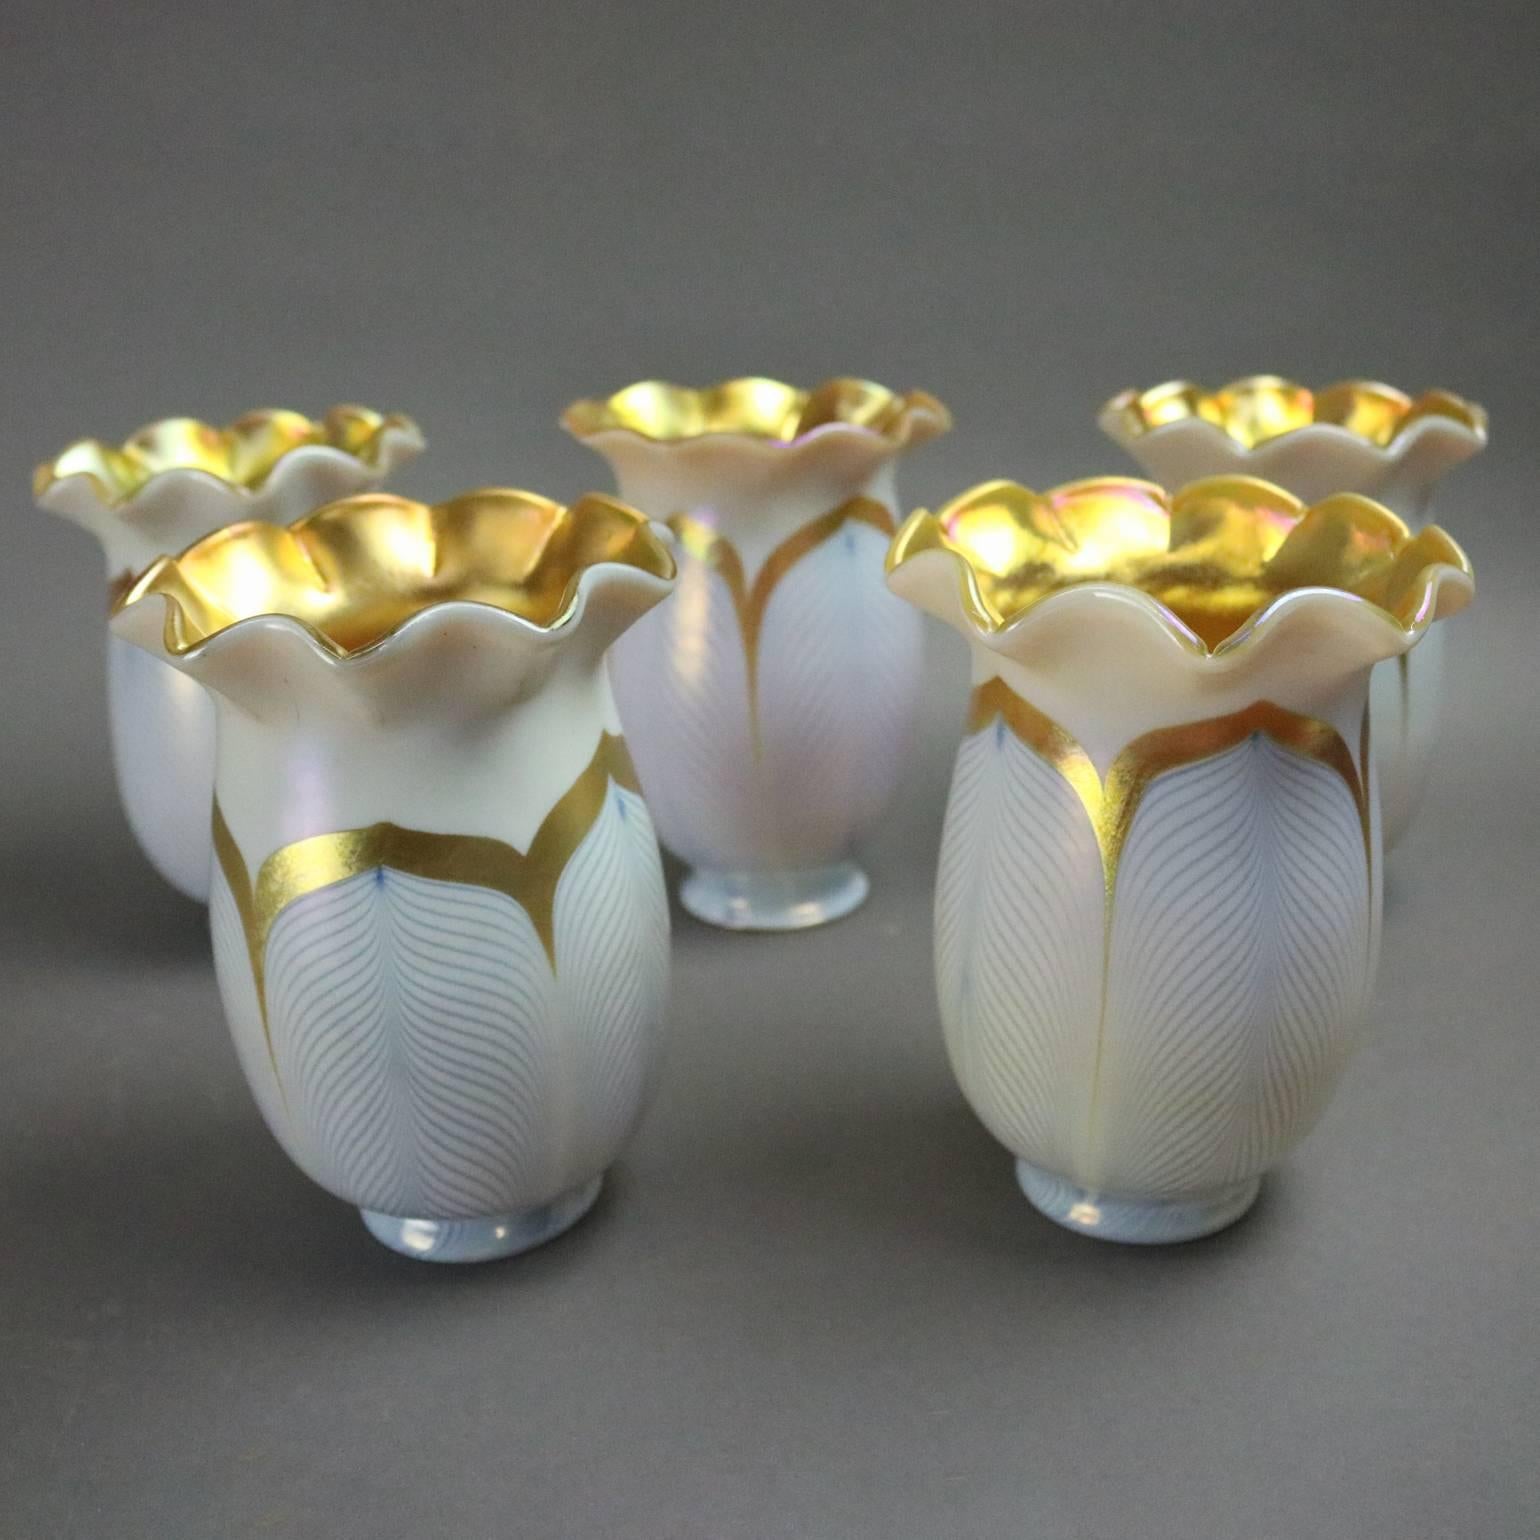 Set of five Art Nouveau gold Aurene and calcite art glass pulled feather lamp shades from the Fredrick Carter era, circa 1920

Measures: 5.75" height x 4" diameter, 2.25" diameter fitter.